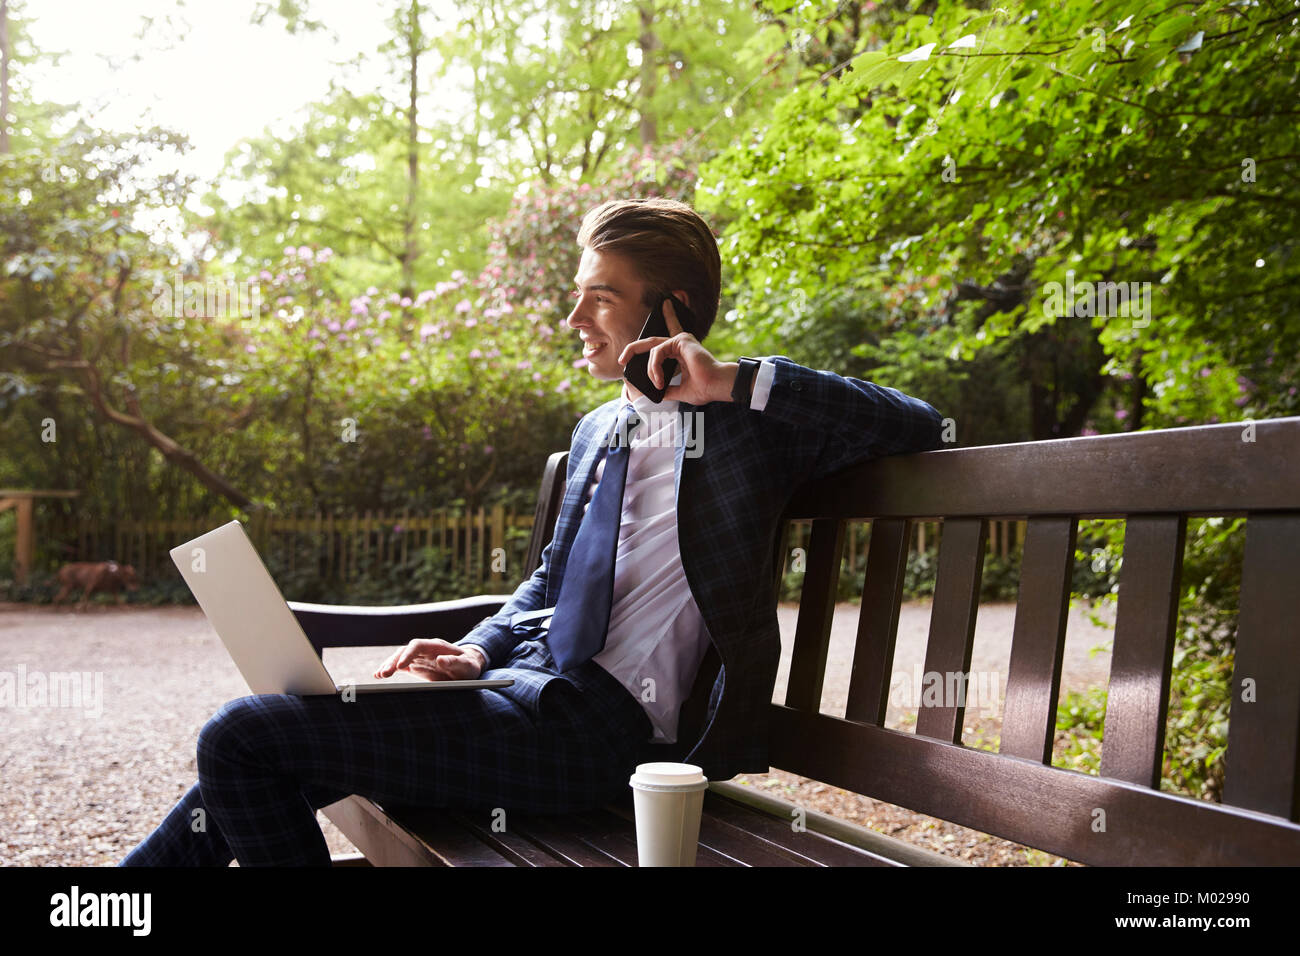 Young businessman sitting on bench using laptop and phone Stock Photo